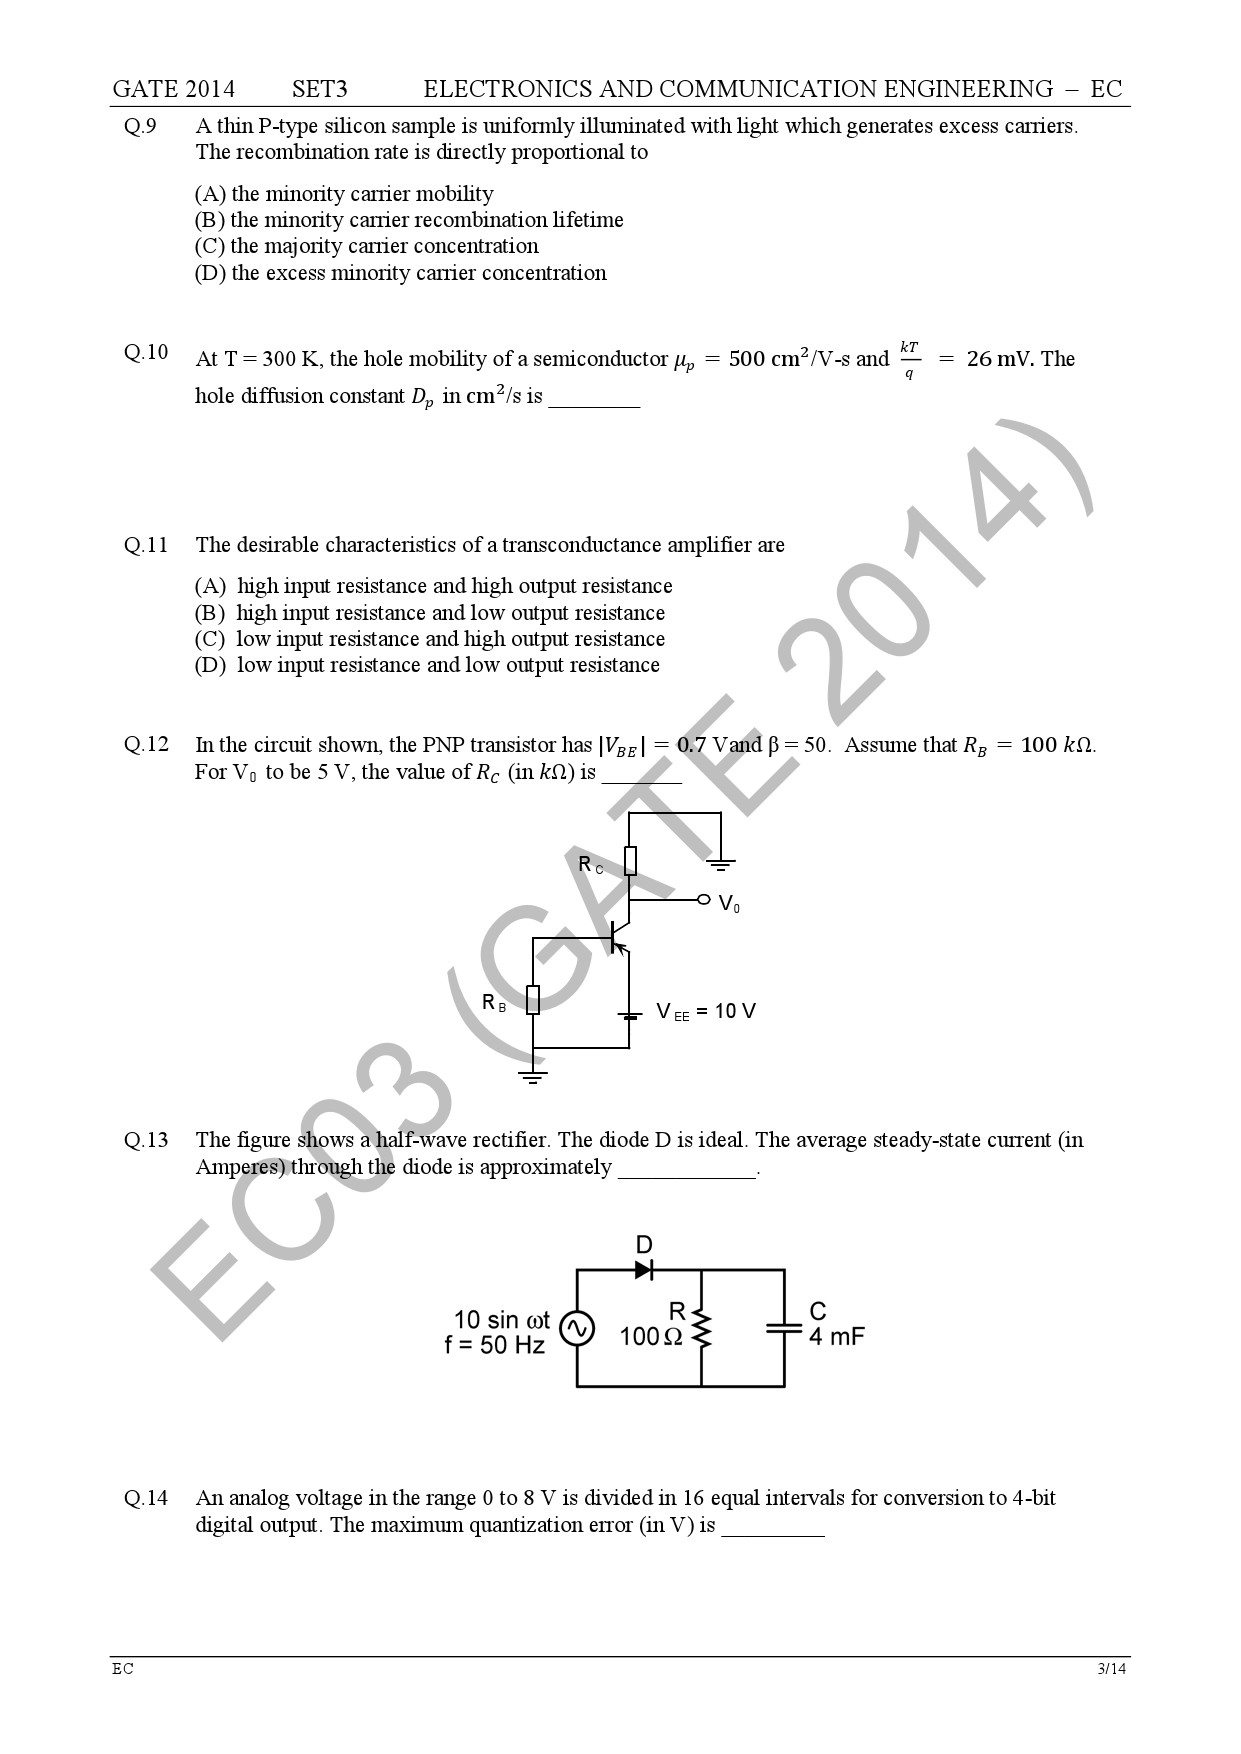 GATE Exam Question Paper 2014 Electronics and Communication Engineering Set 3 10